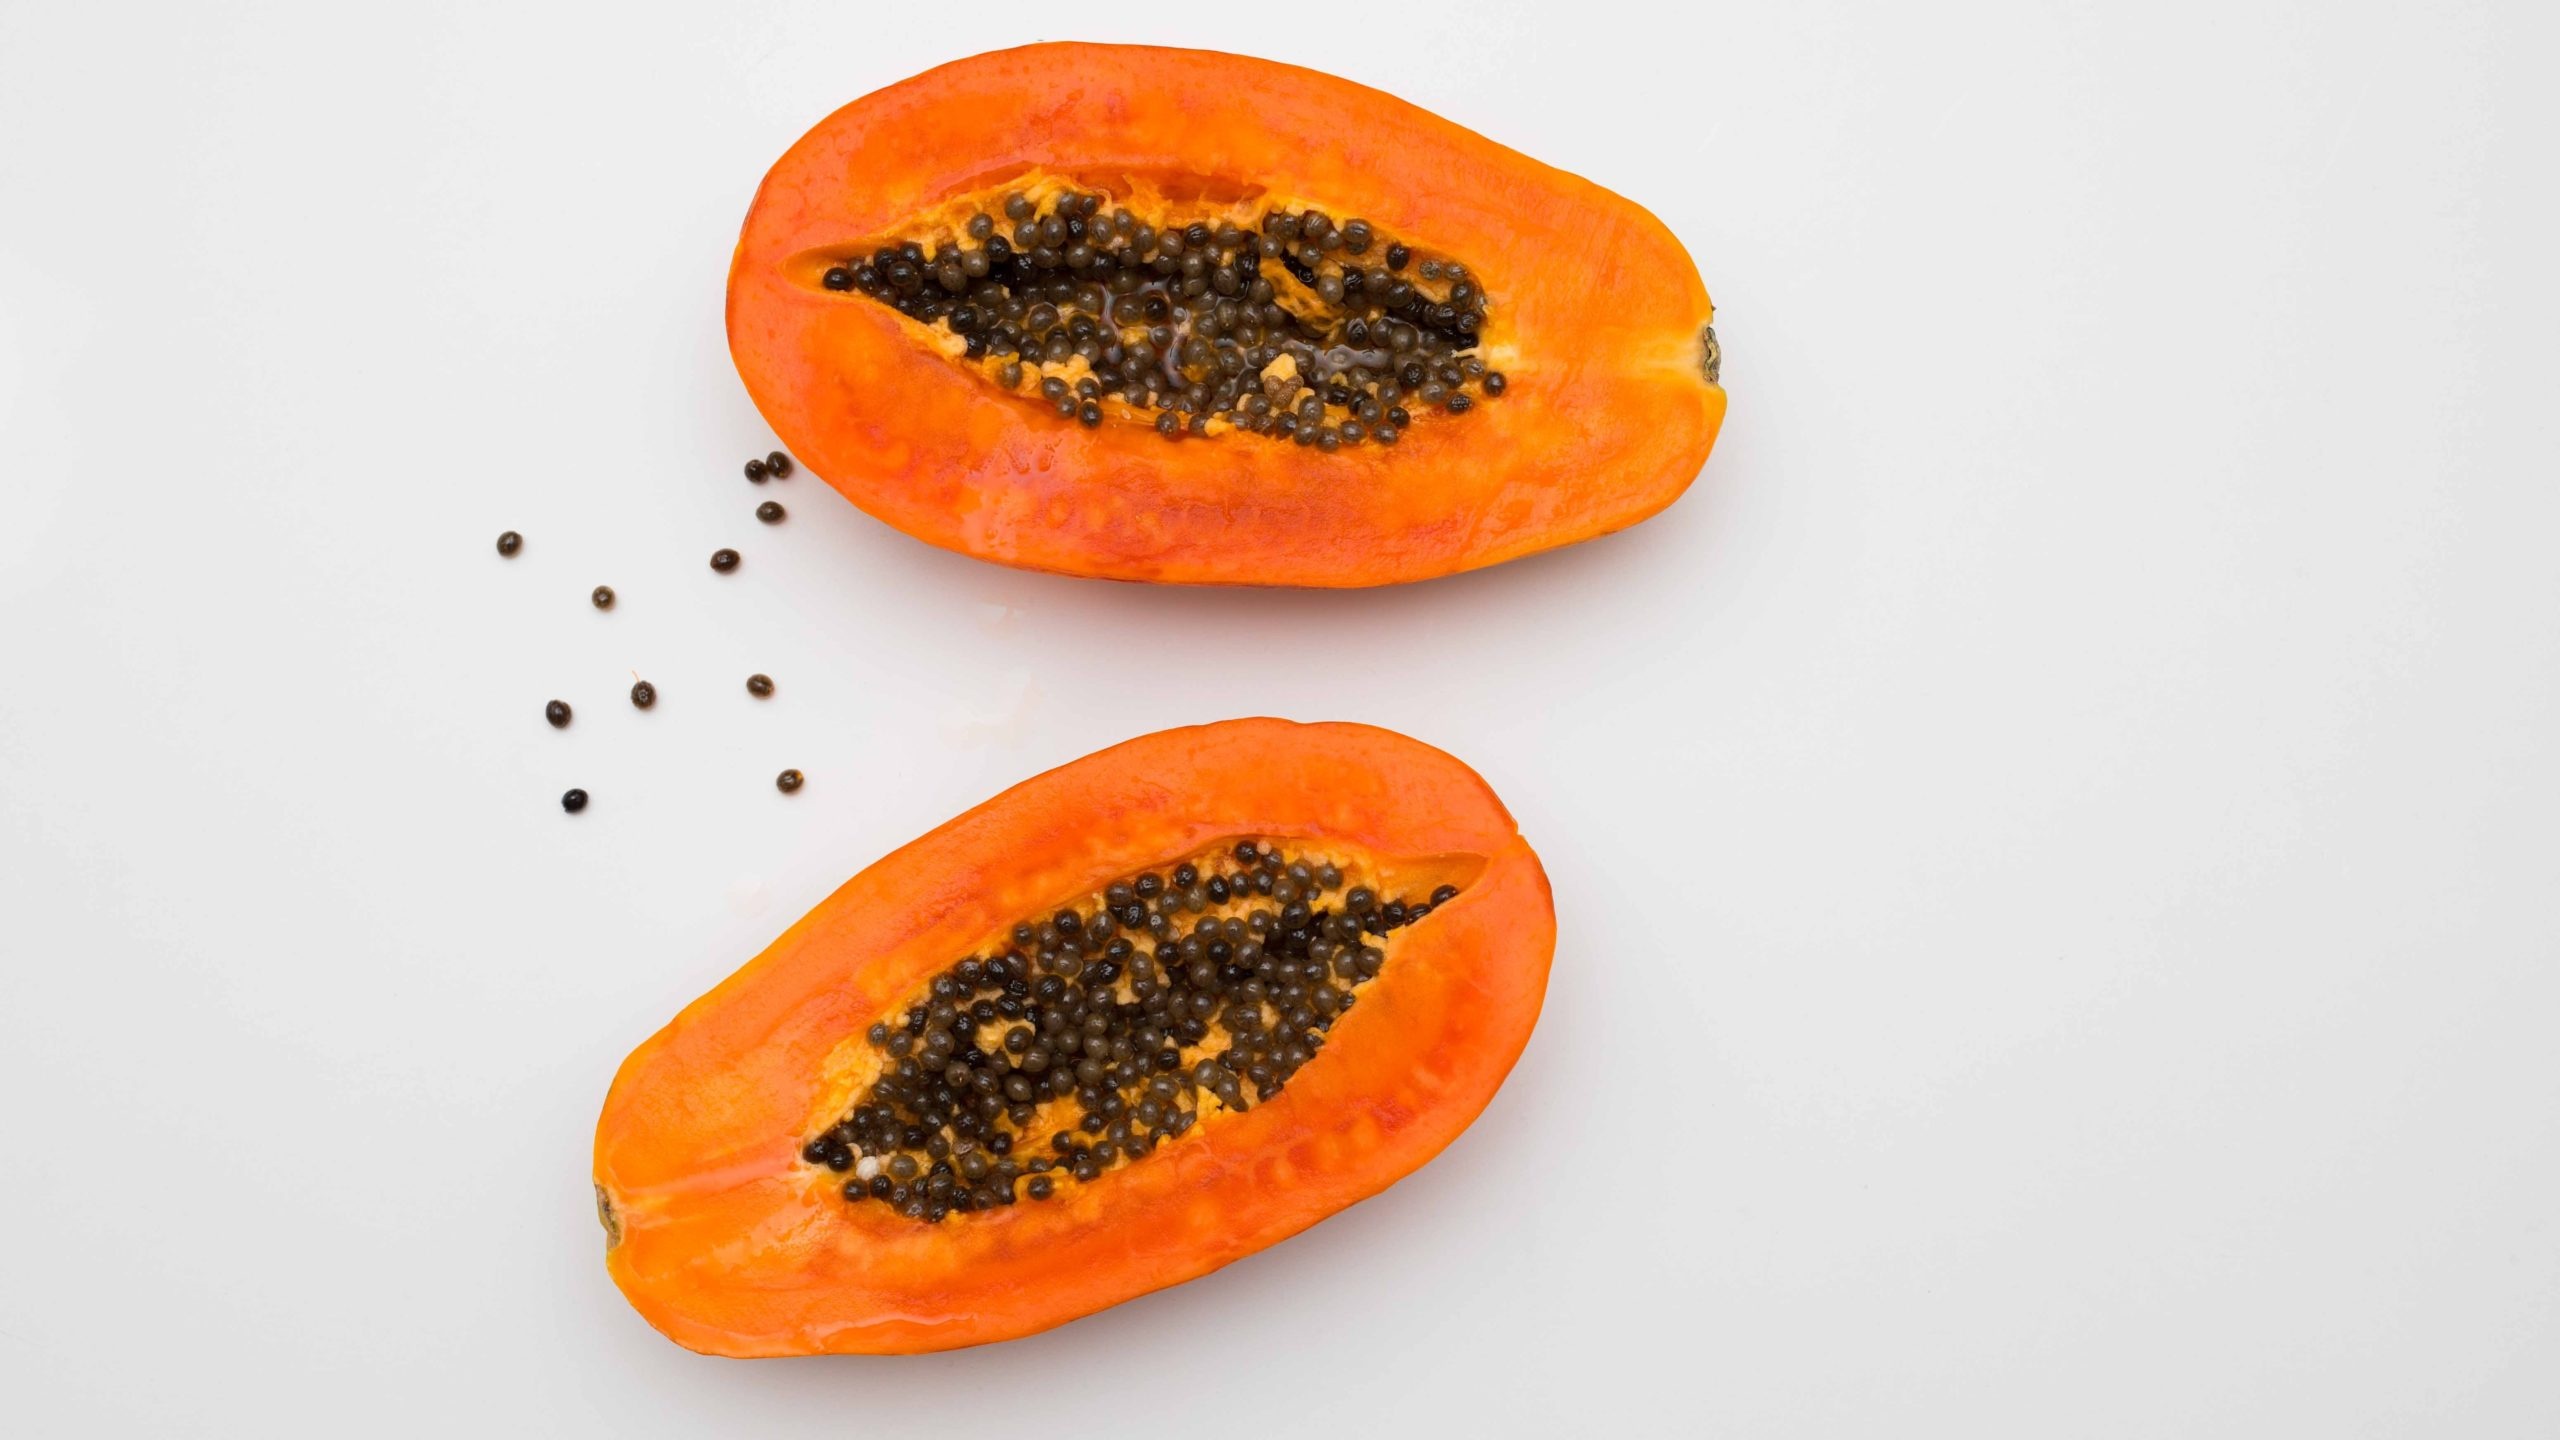 Papaya: Cultivated throughout the tropical world and into the warmest parts of the subtropics. 2560x1440 HD Wallpaper.